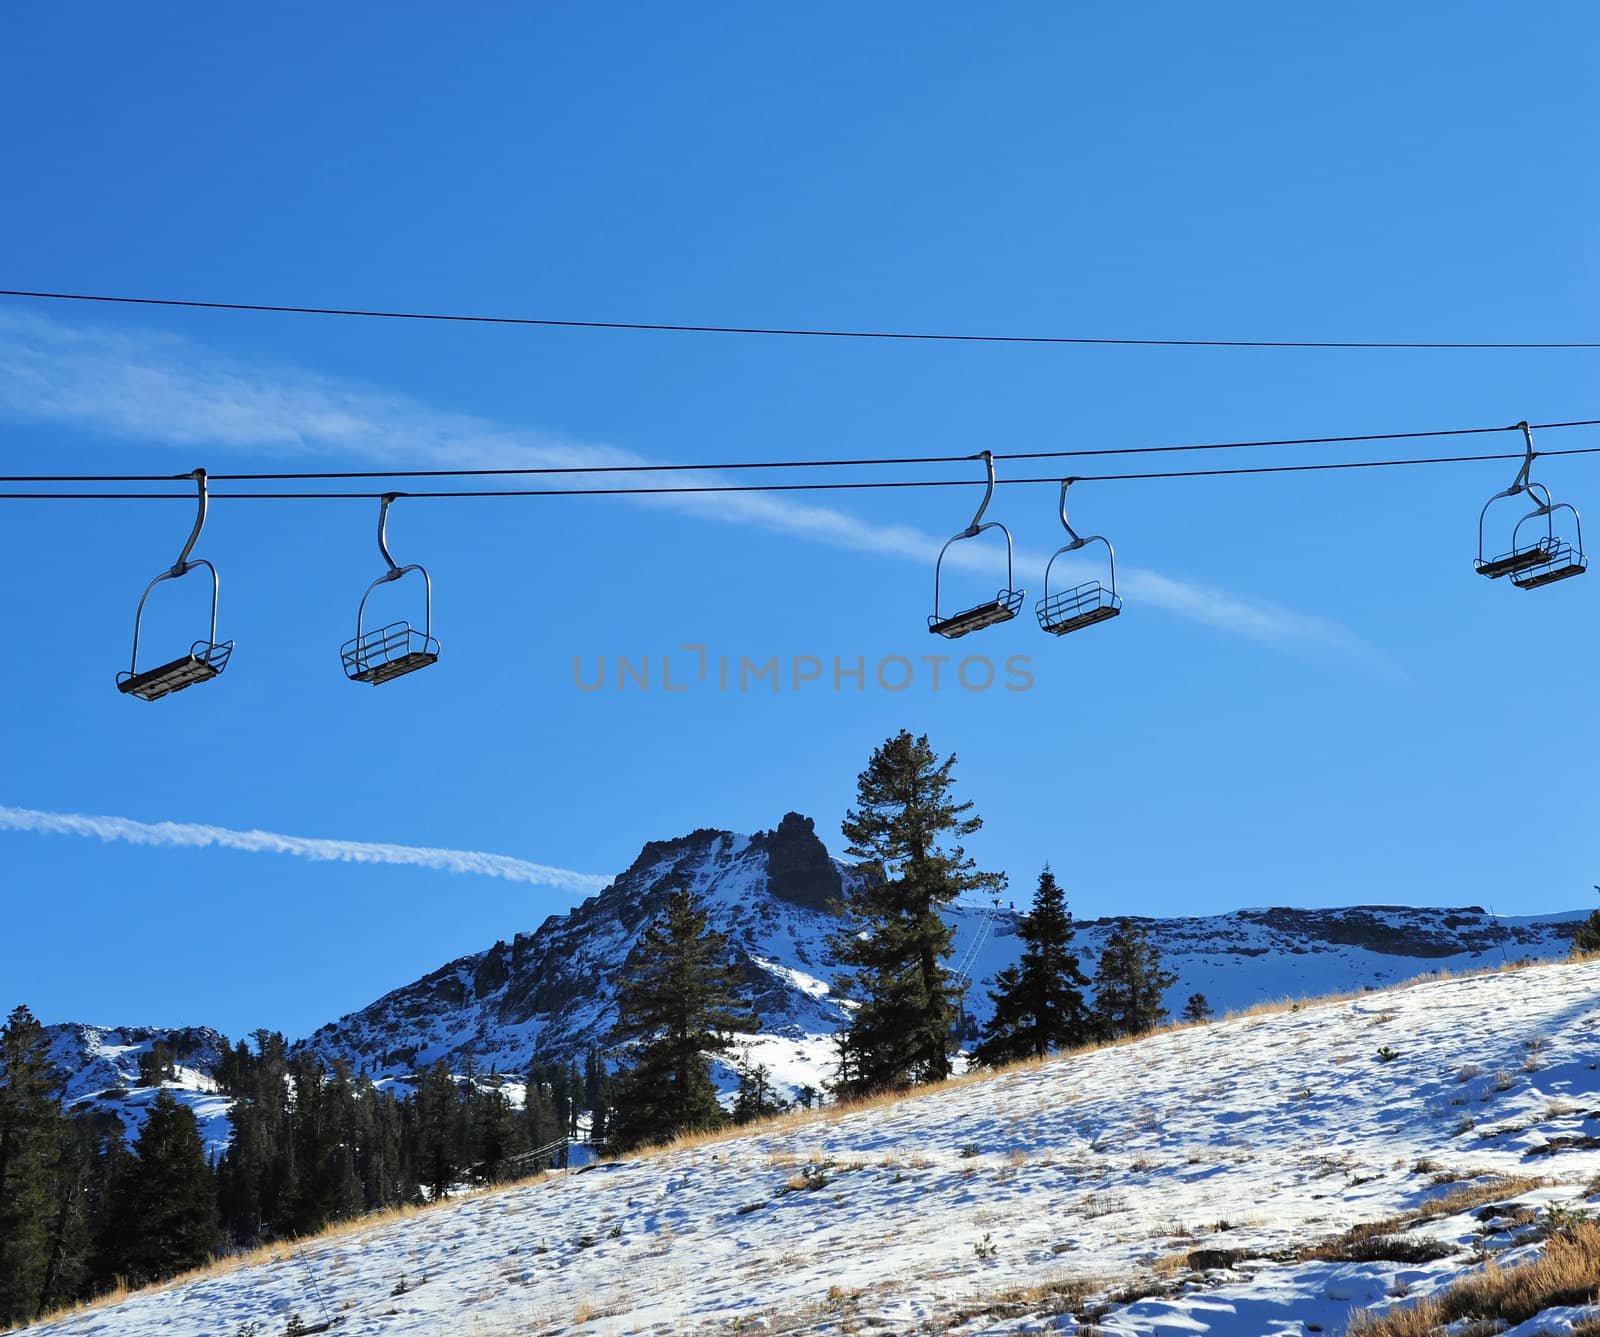 Ski lift in the California Sierra's at late Autumn waiting for winter show